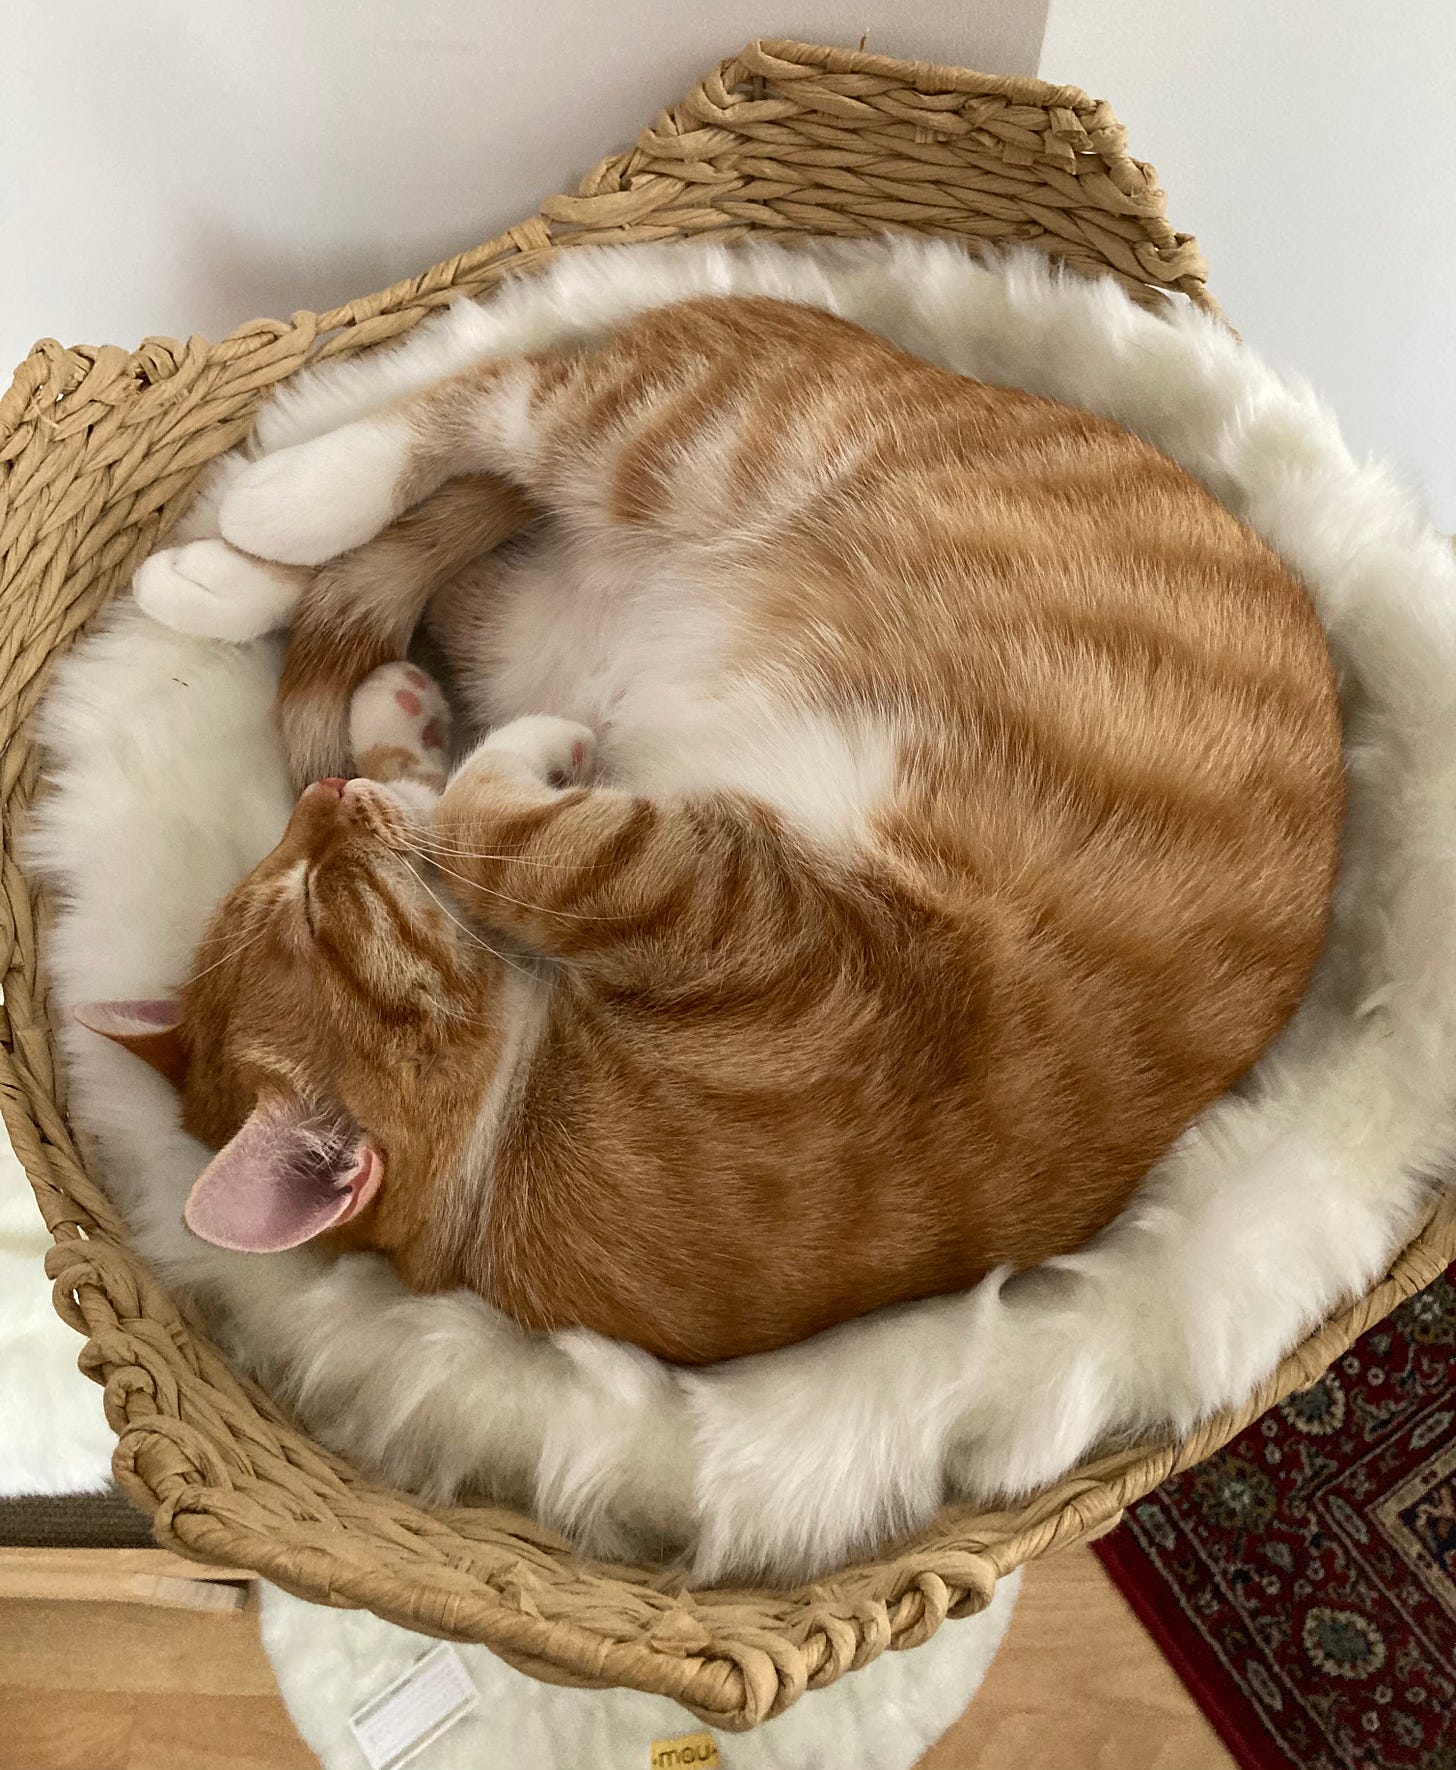 Orange and white cat curled up like a little croissant or shrimp on a bed of white fake fur.